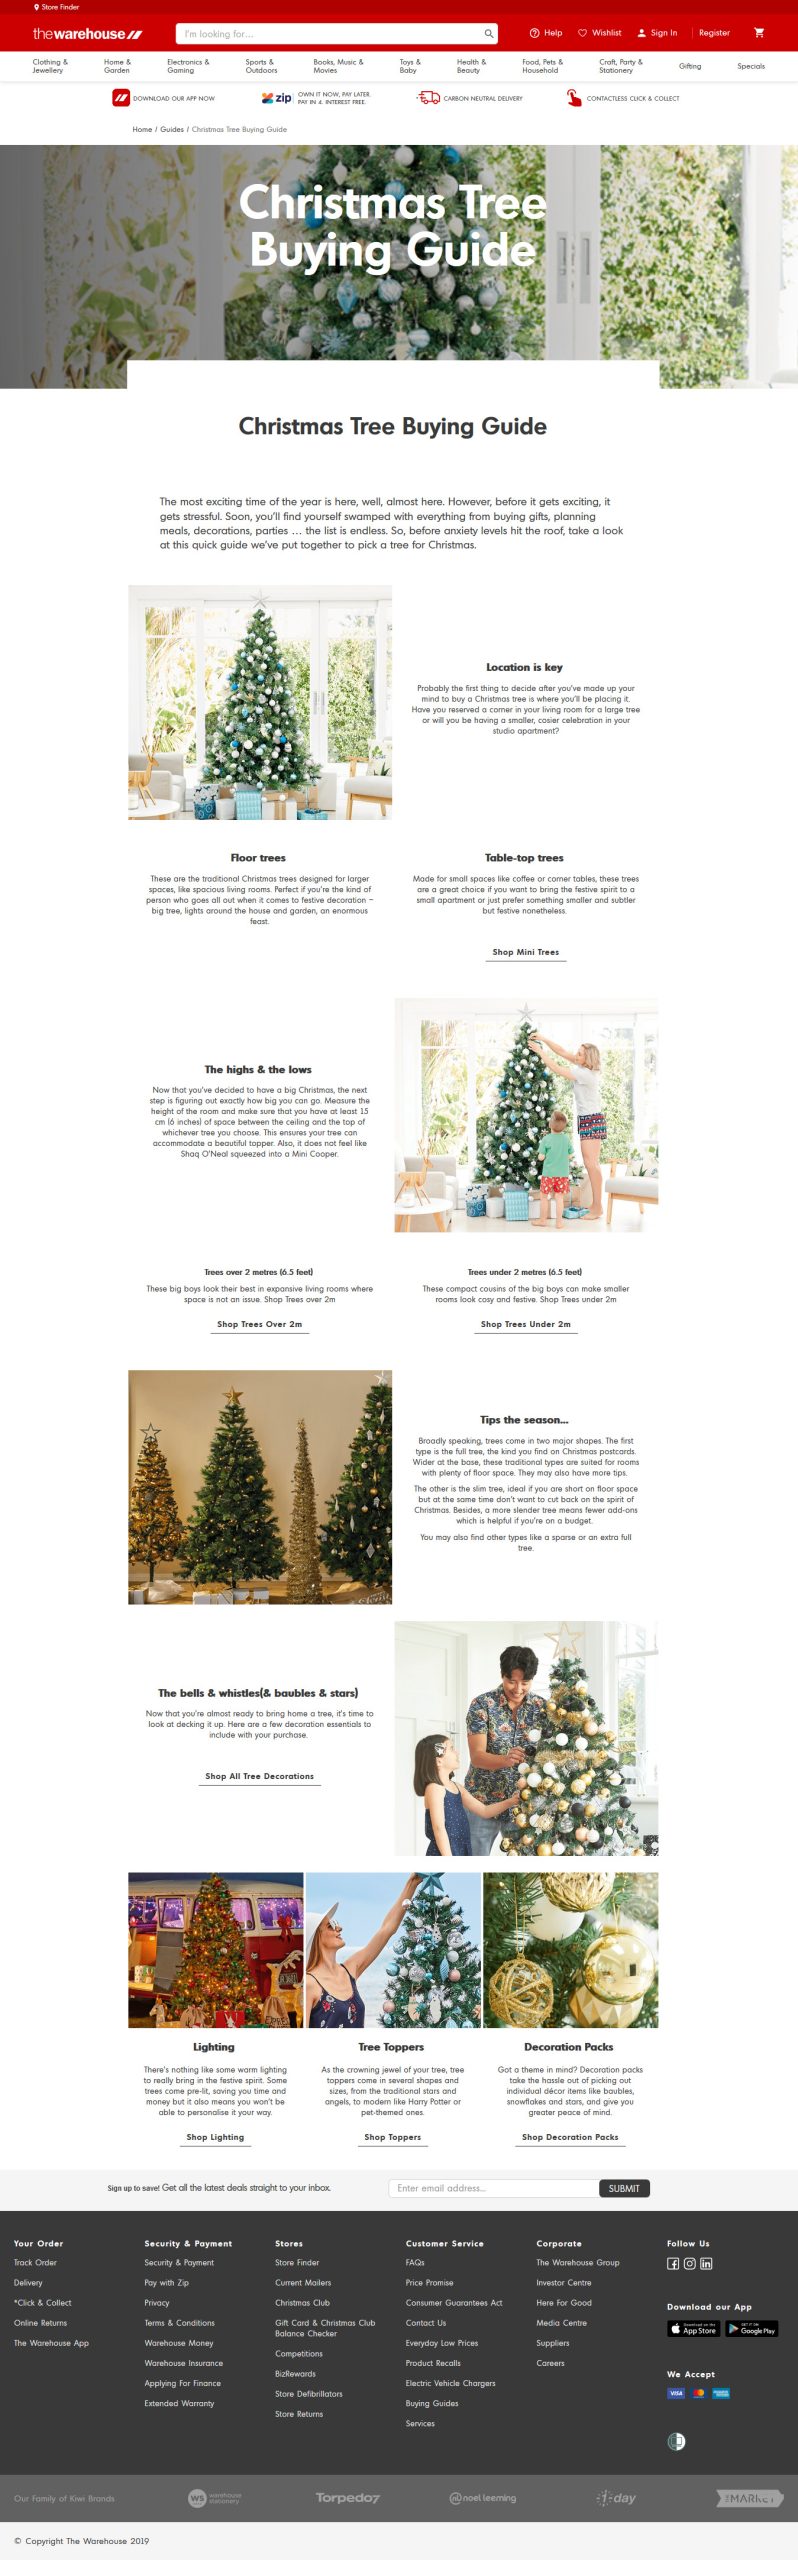 Christmas Tree Buying Guide The Warehouse scaled